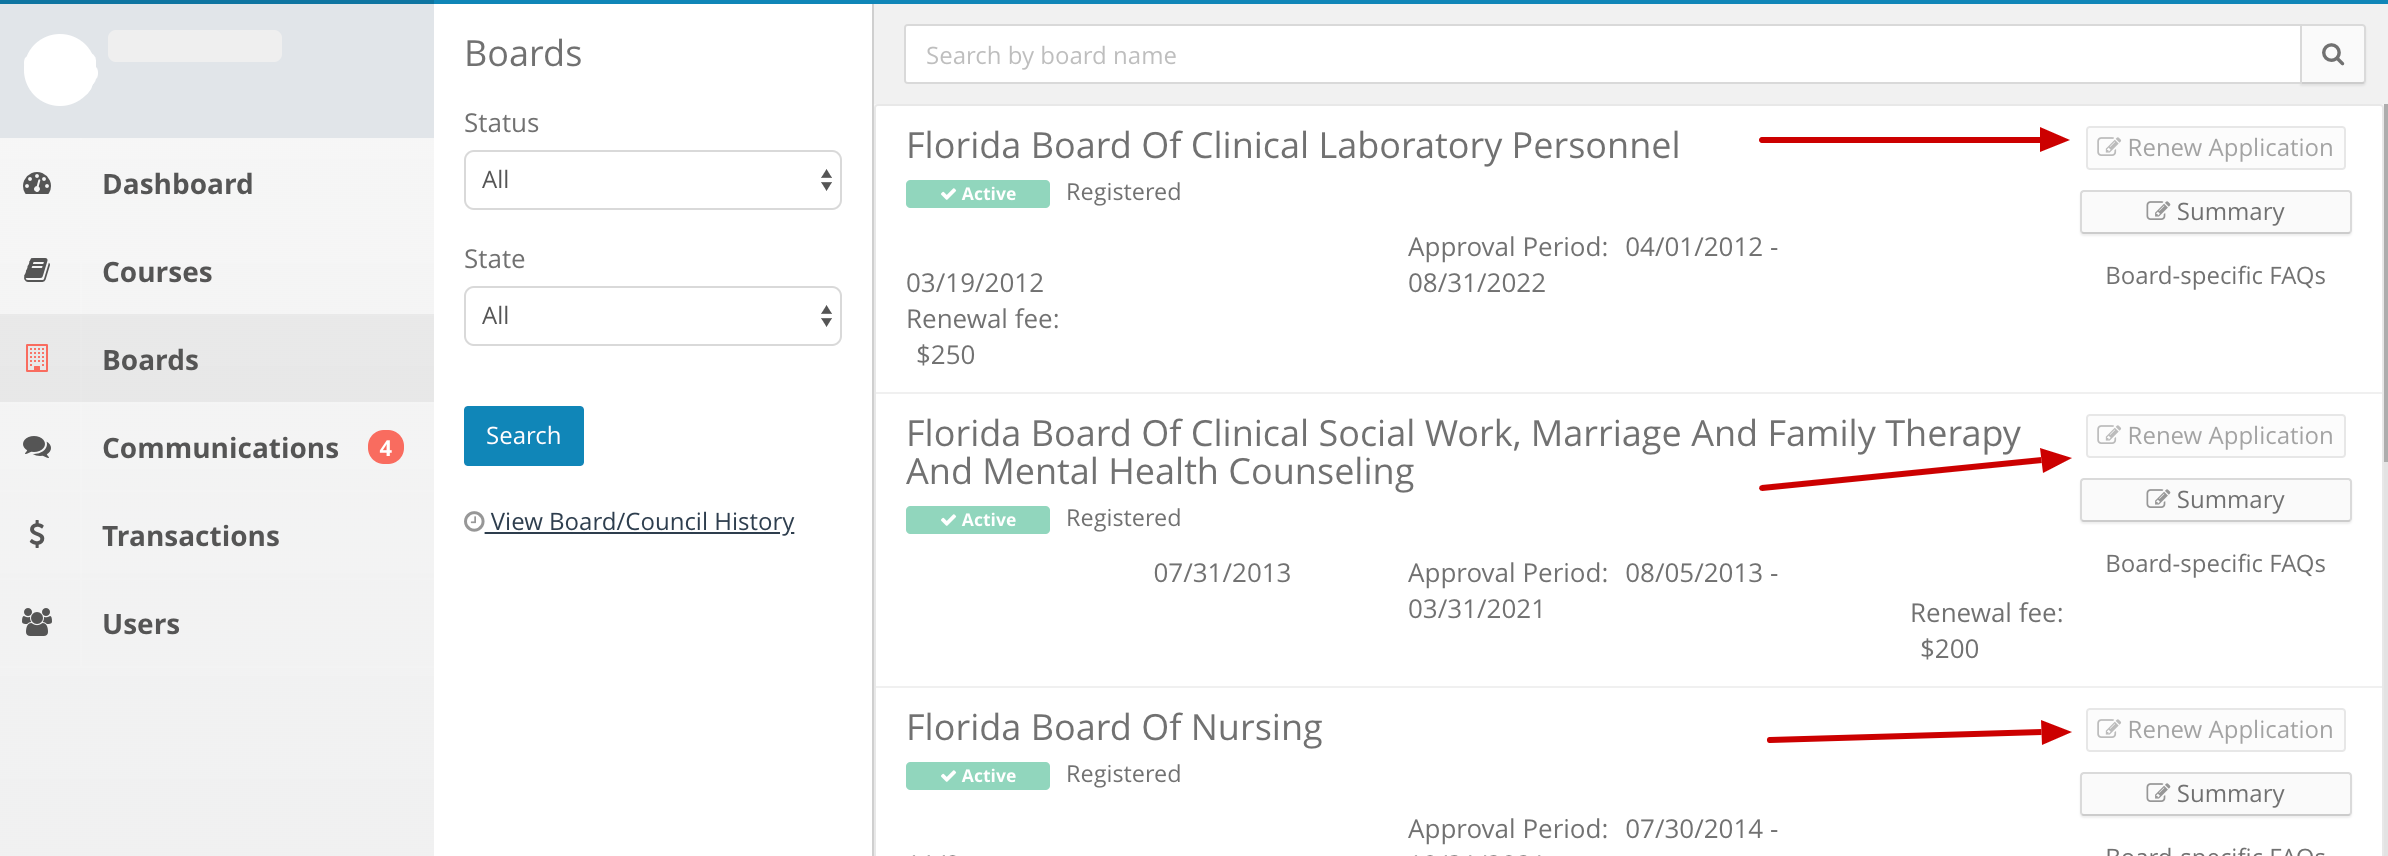 Screenshot of a provider account displaying the list of approving Boards. Arrows point to the Renew Application button next to each applicable board.